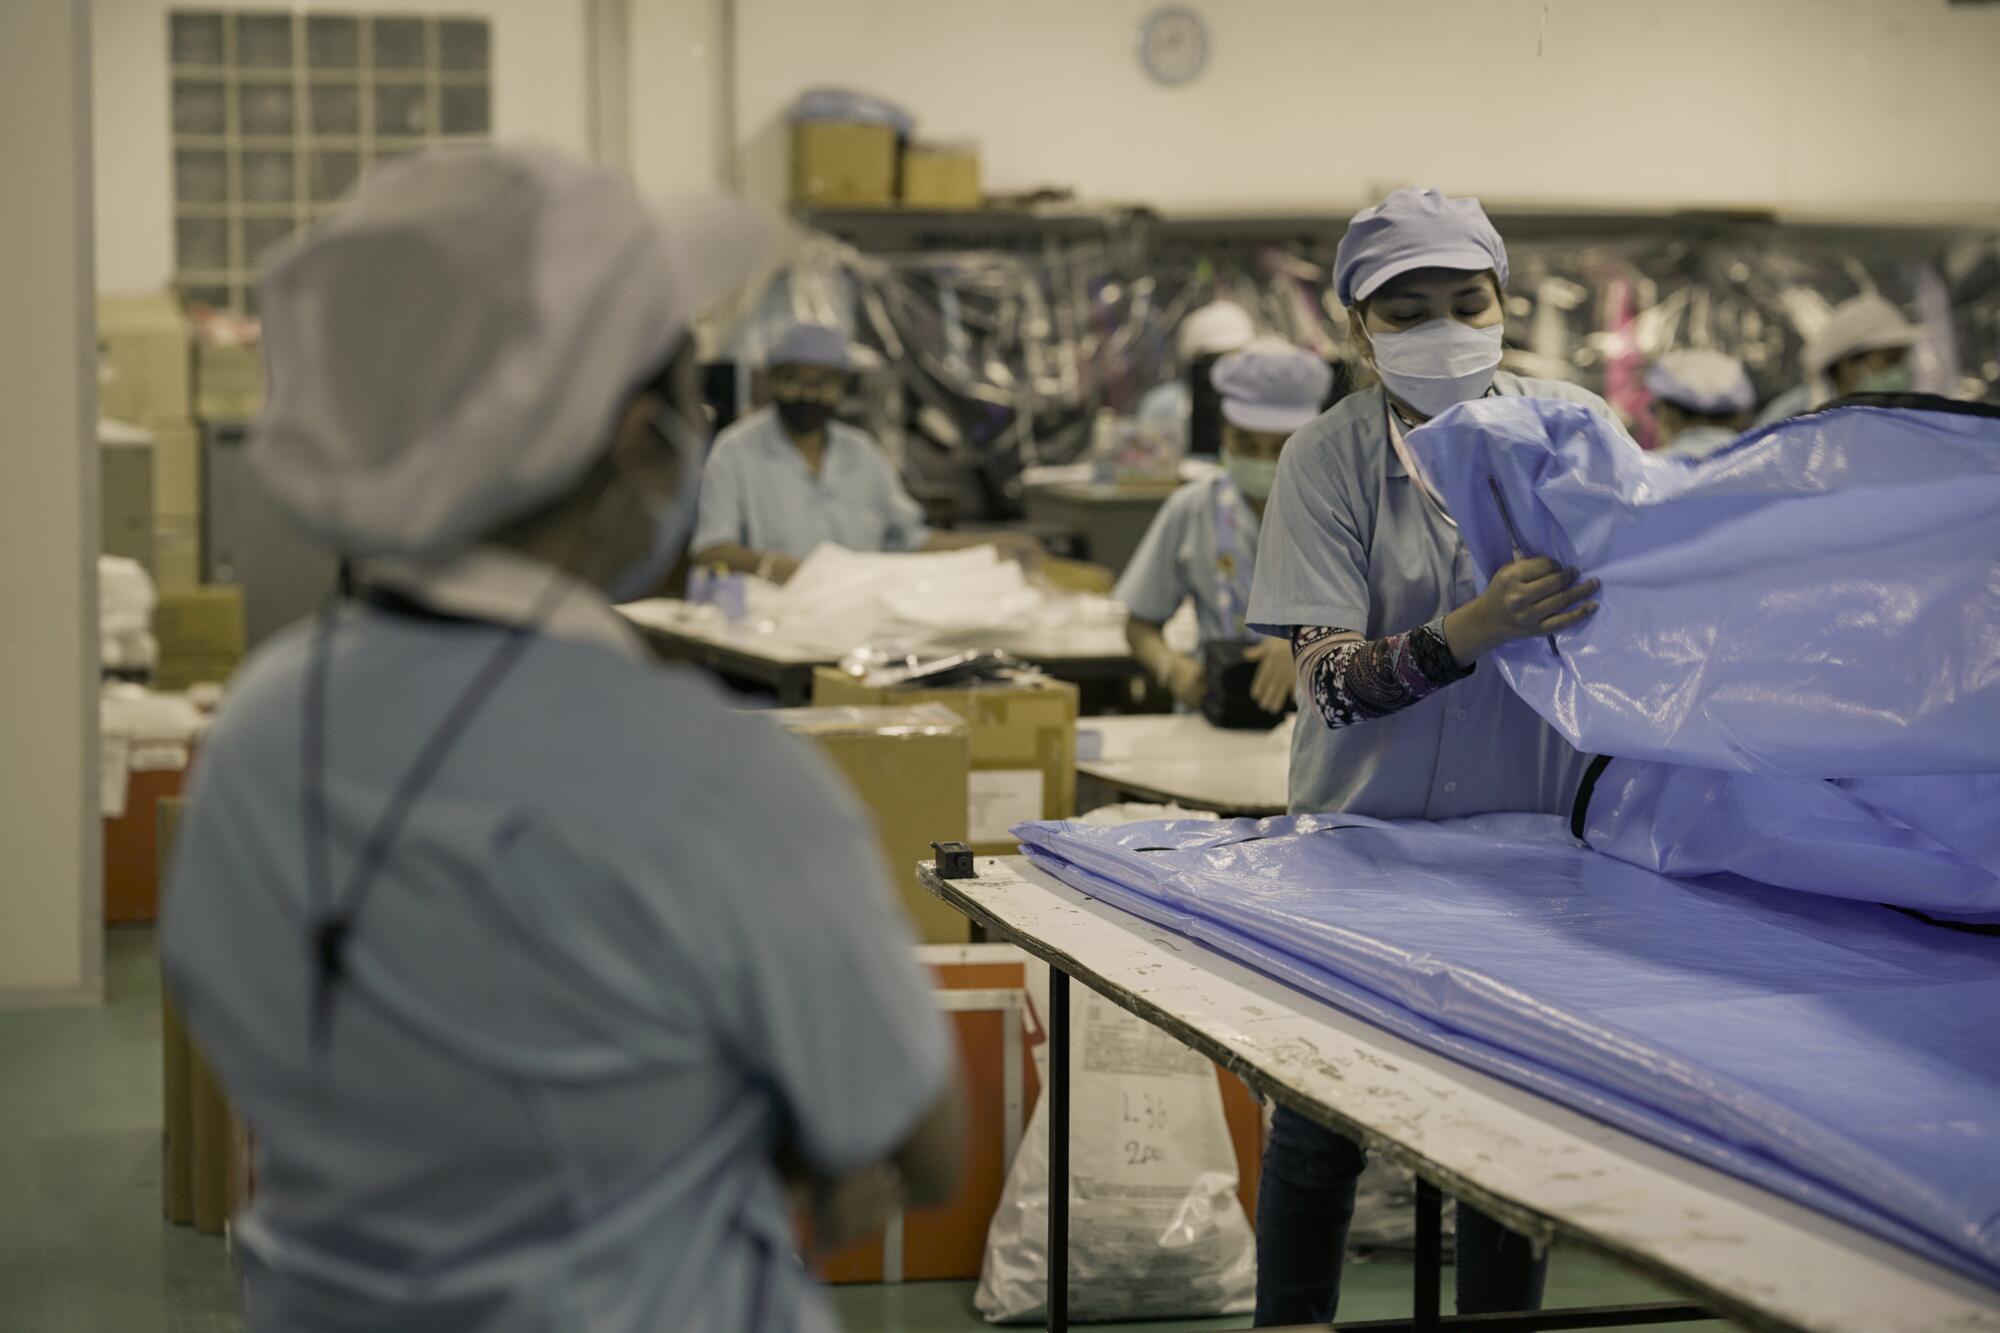 Workers inspect a body bag